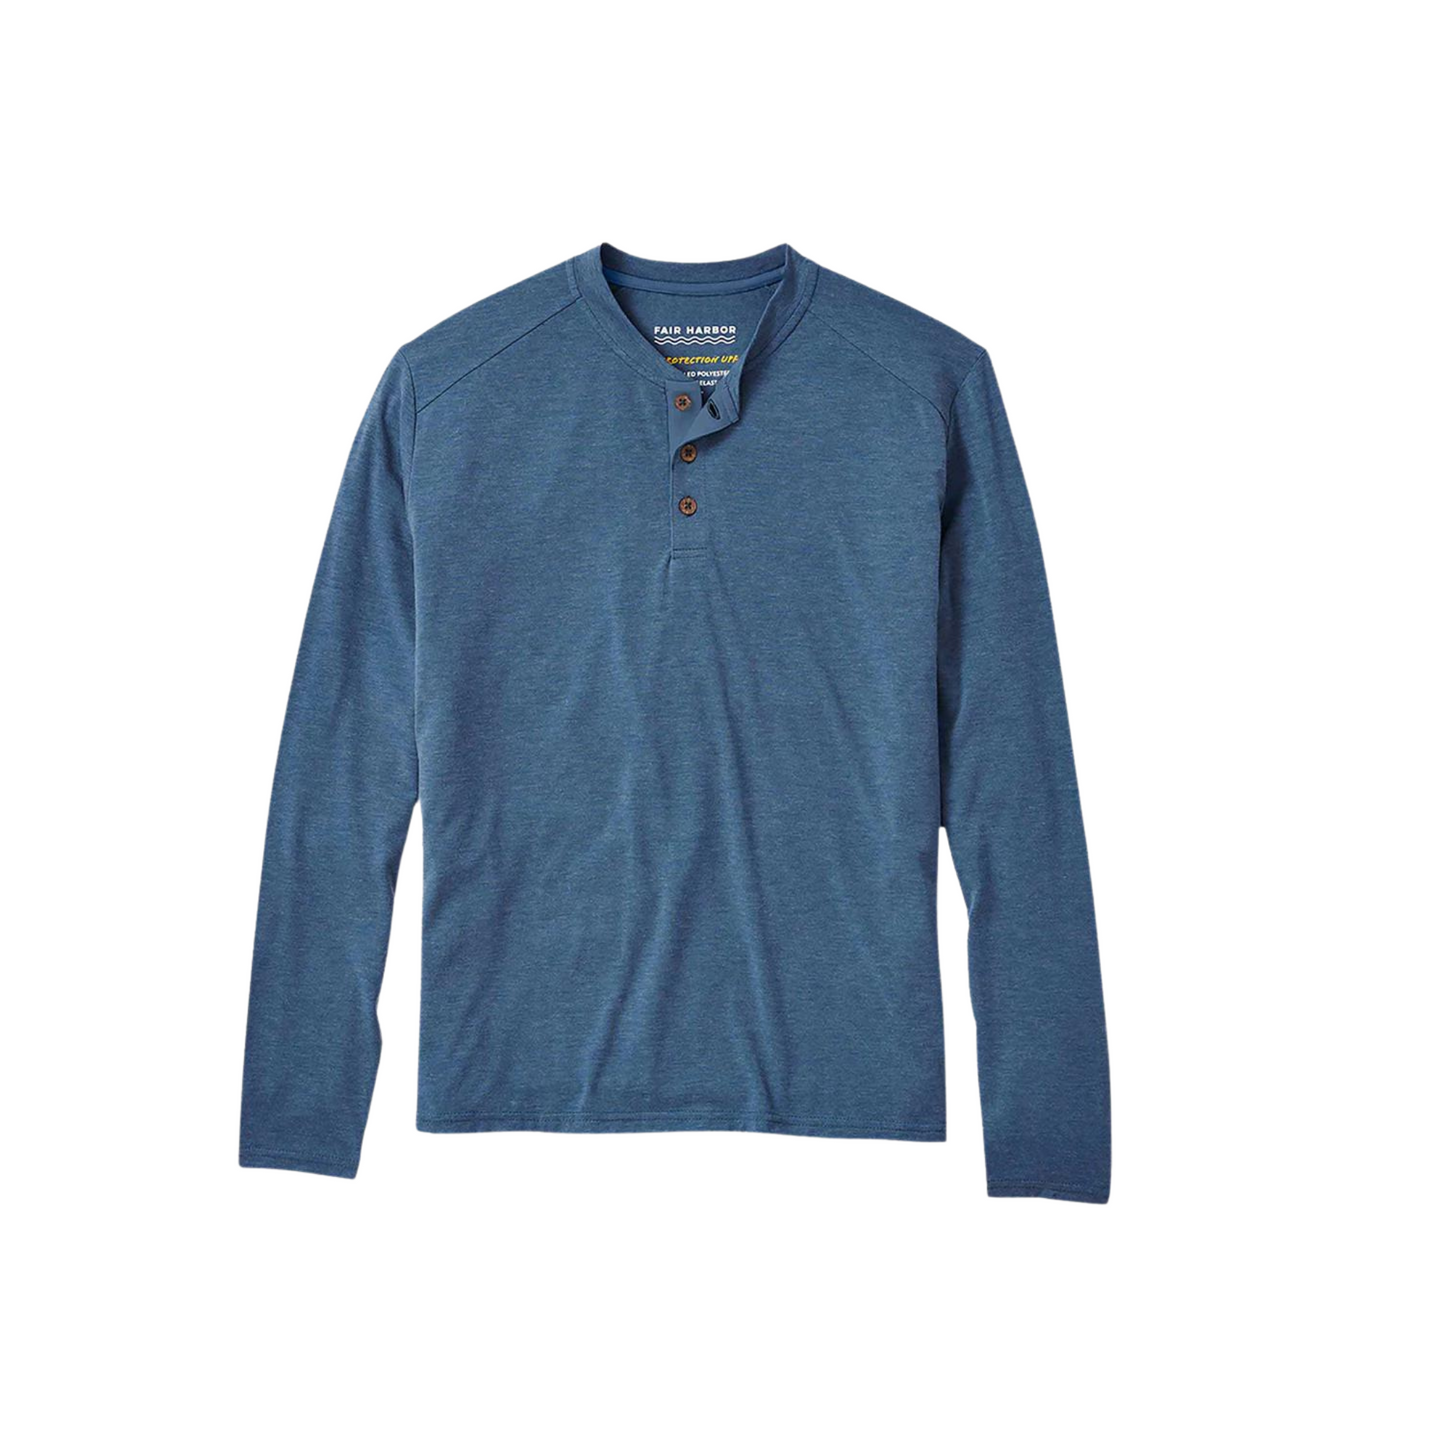 The SeaBreeze Henley